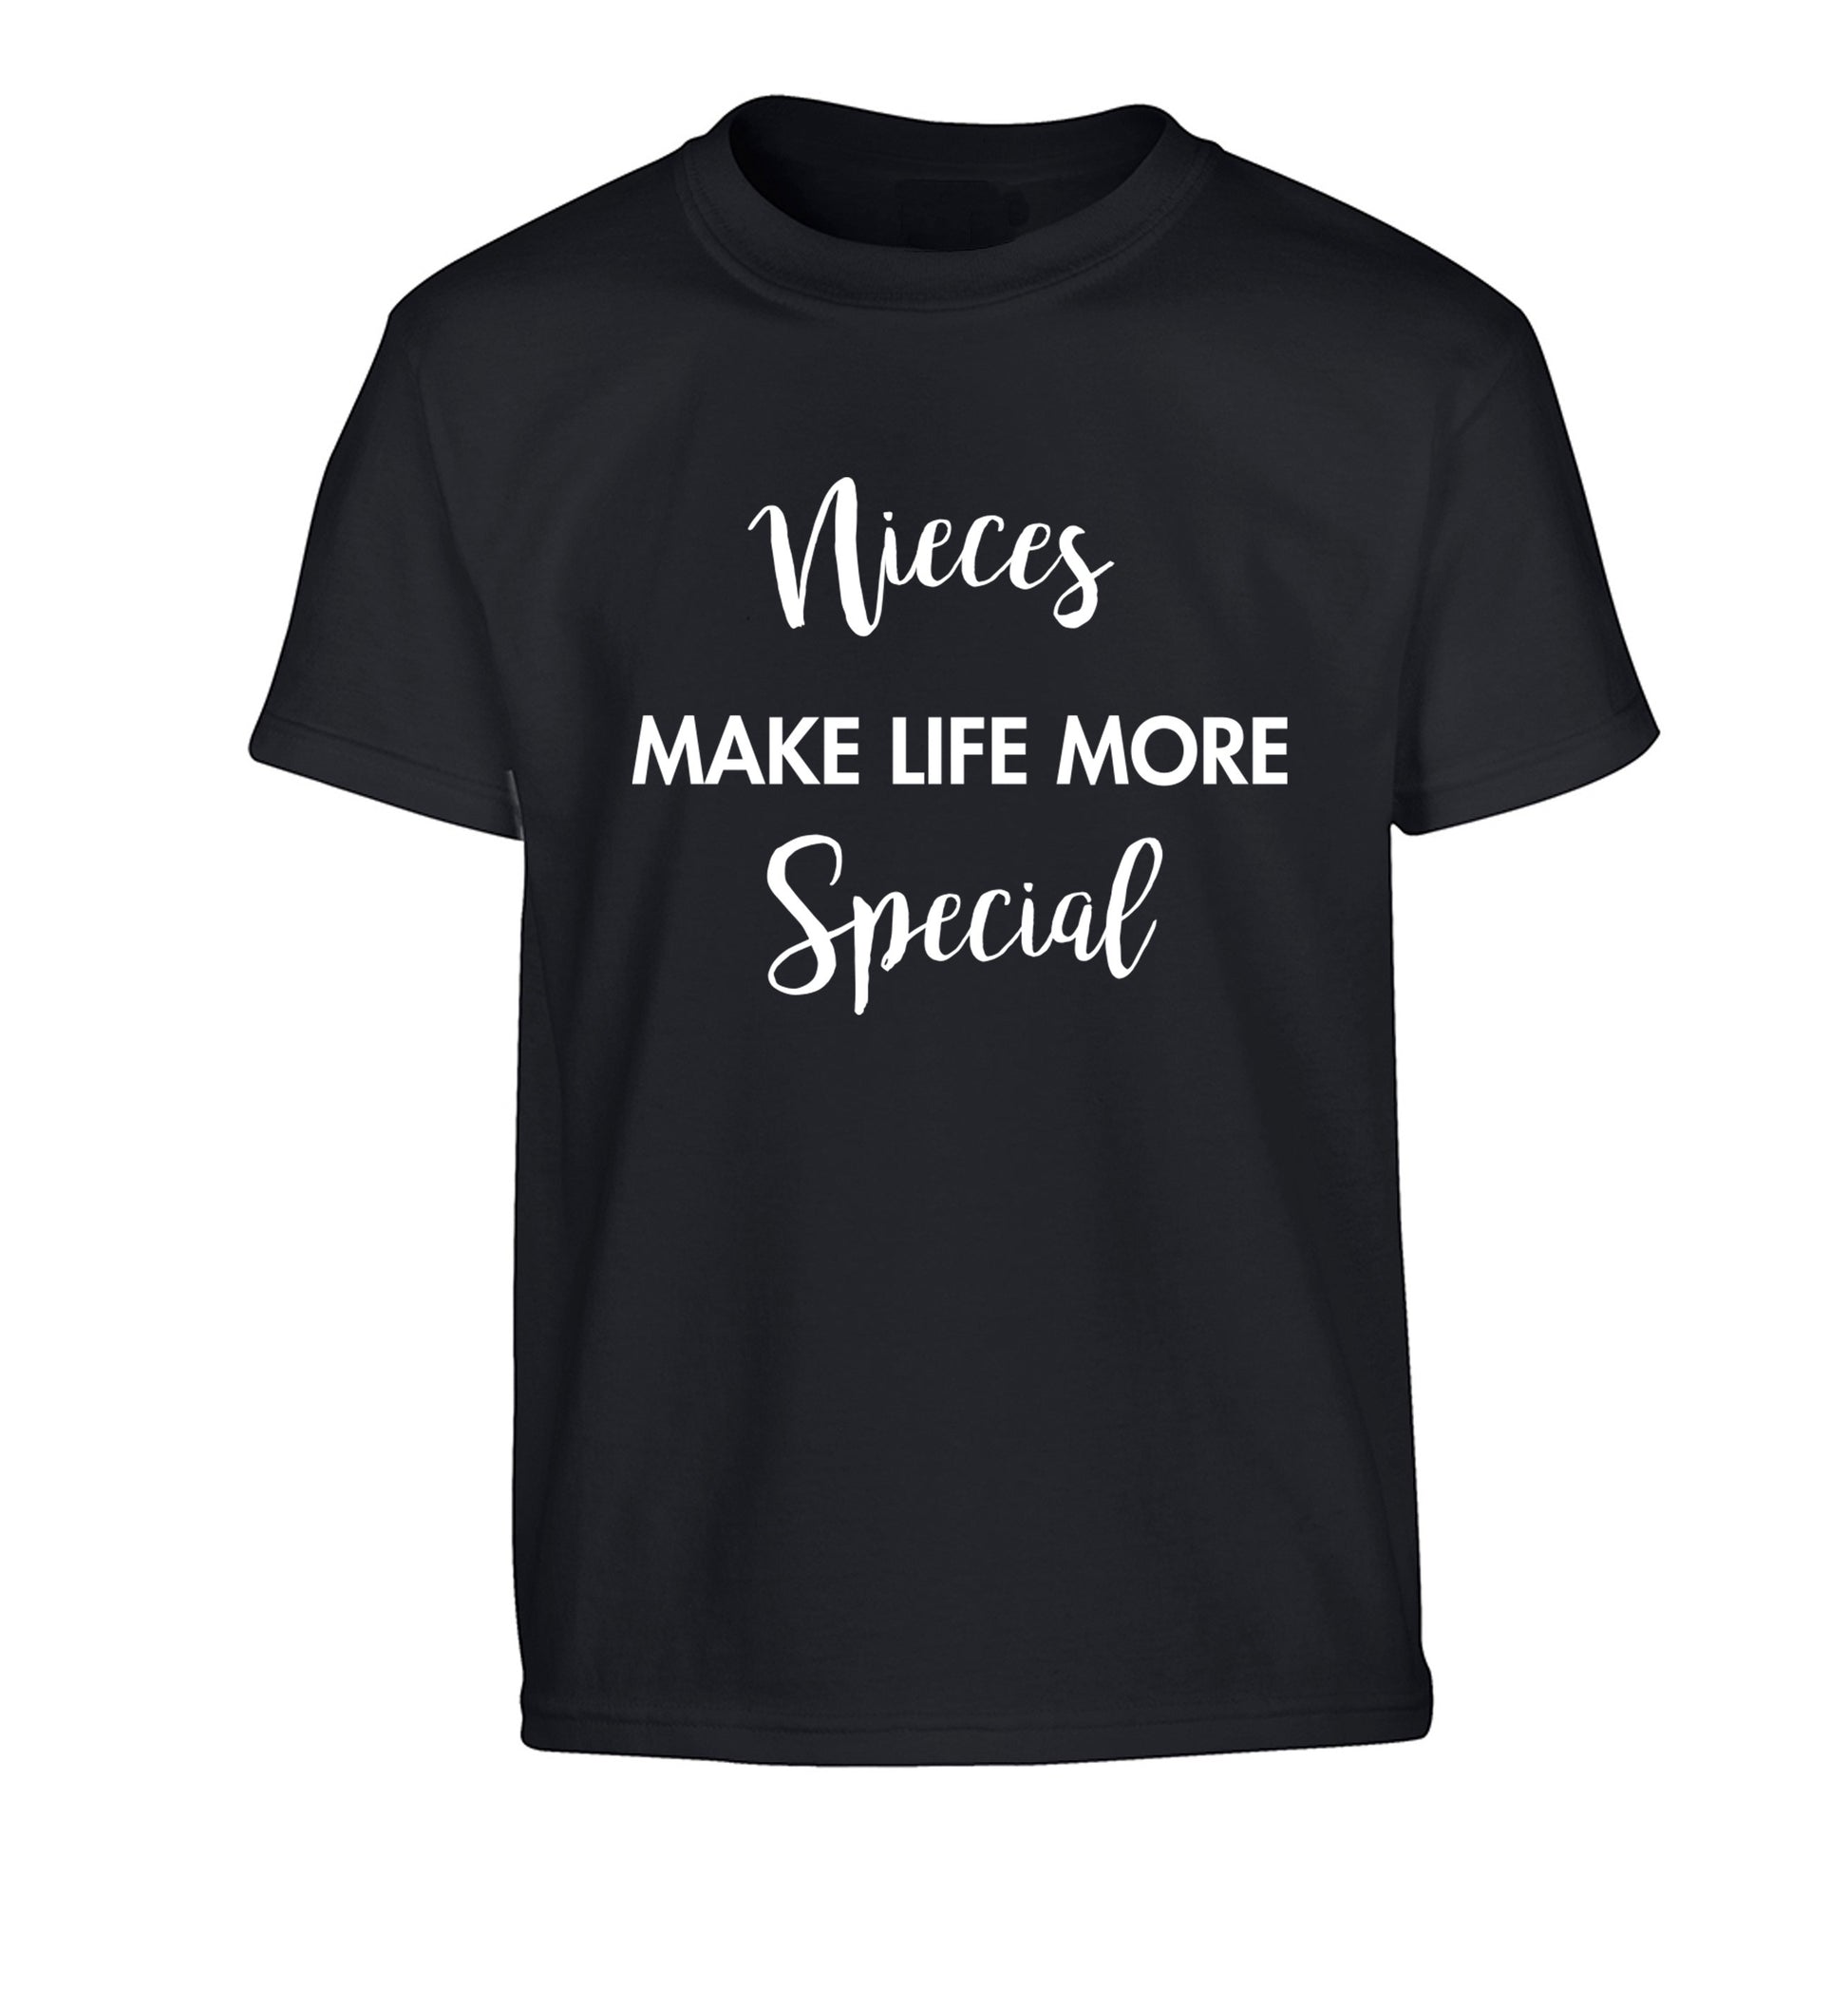 Nieces make life more special Children's black Tshirt 12-14 Years